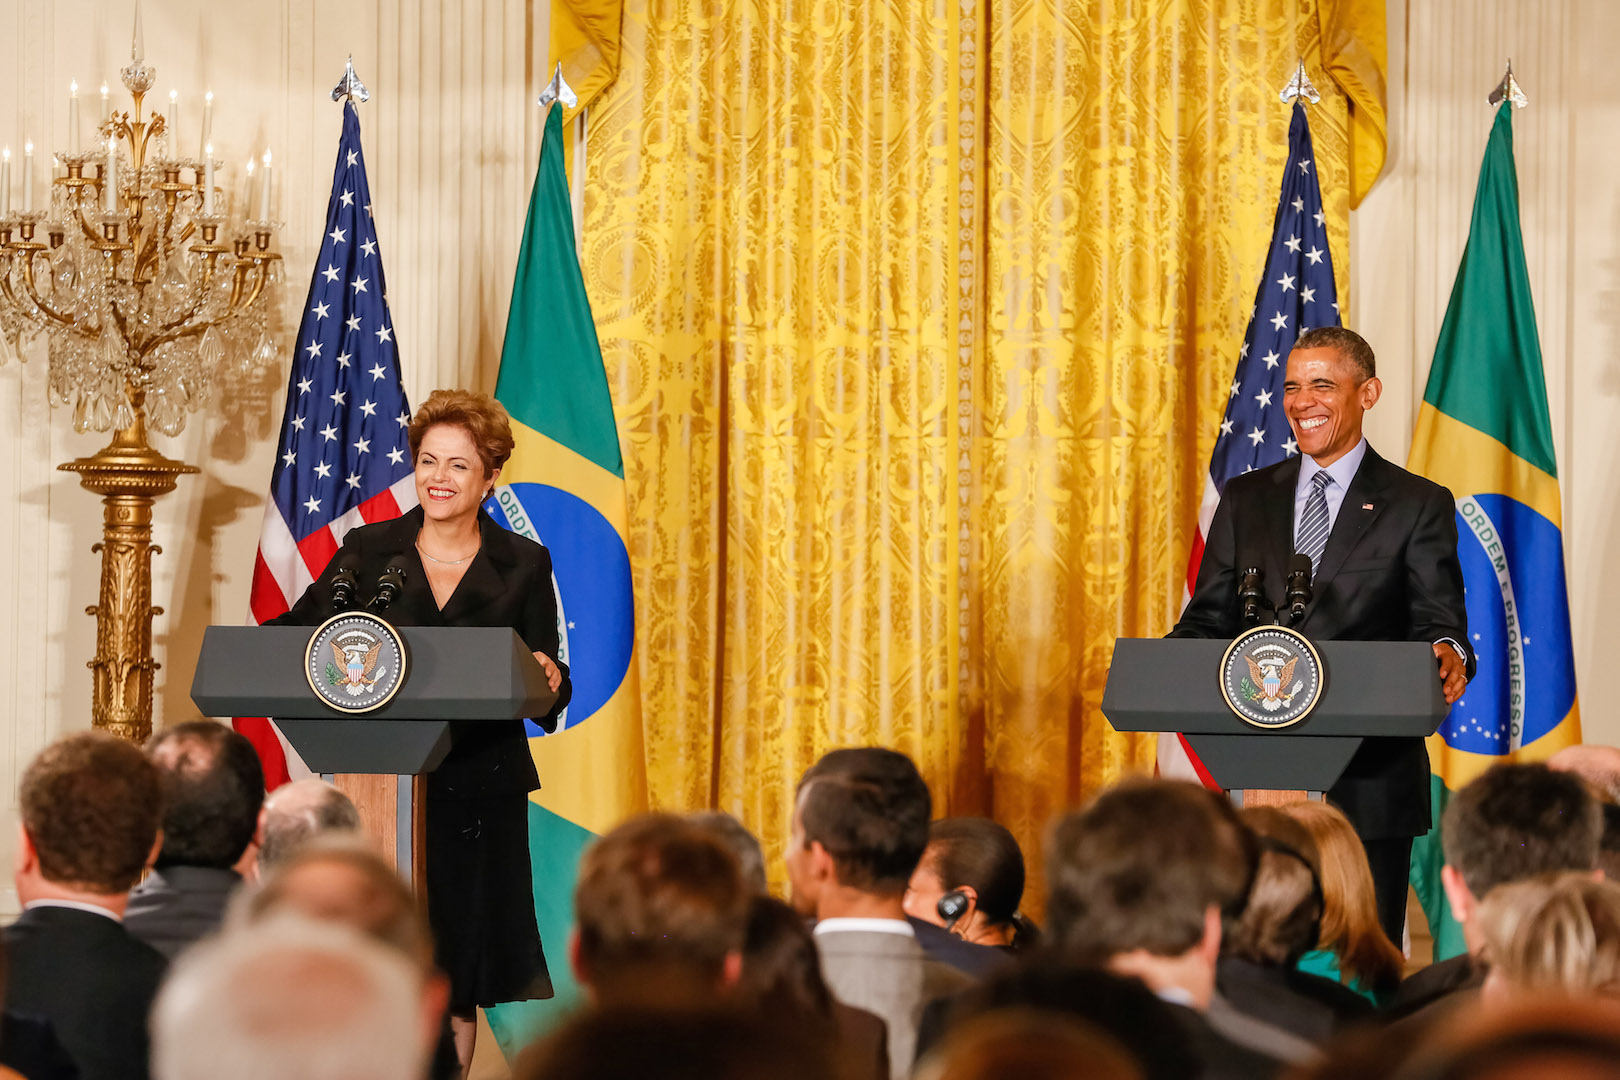 Brazil’s Rousseff and President Obama Hold Press Conference